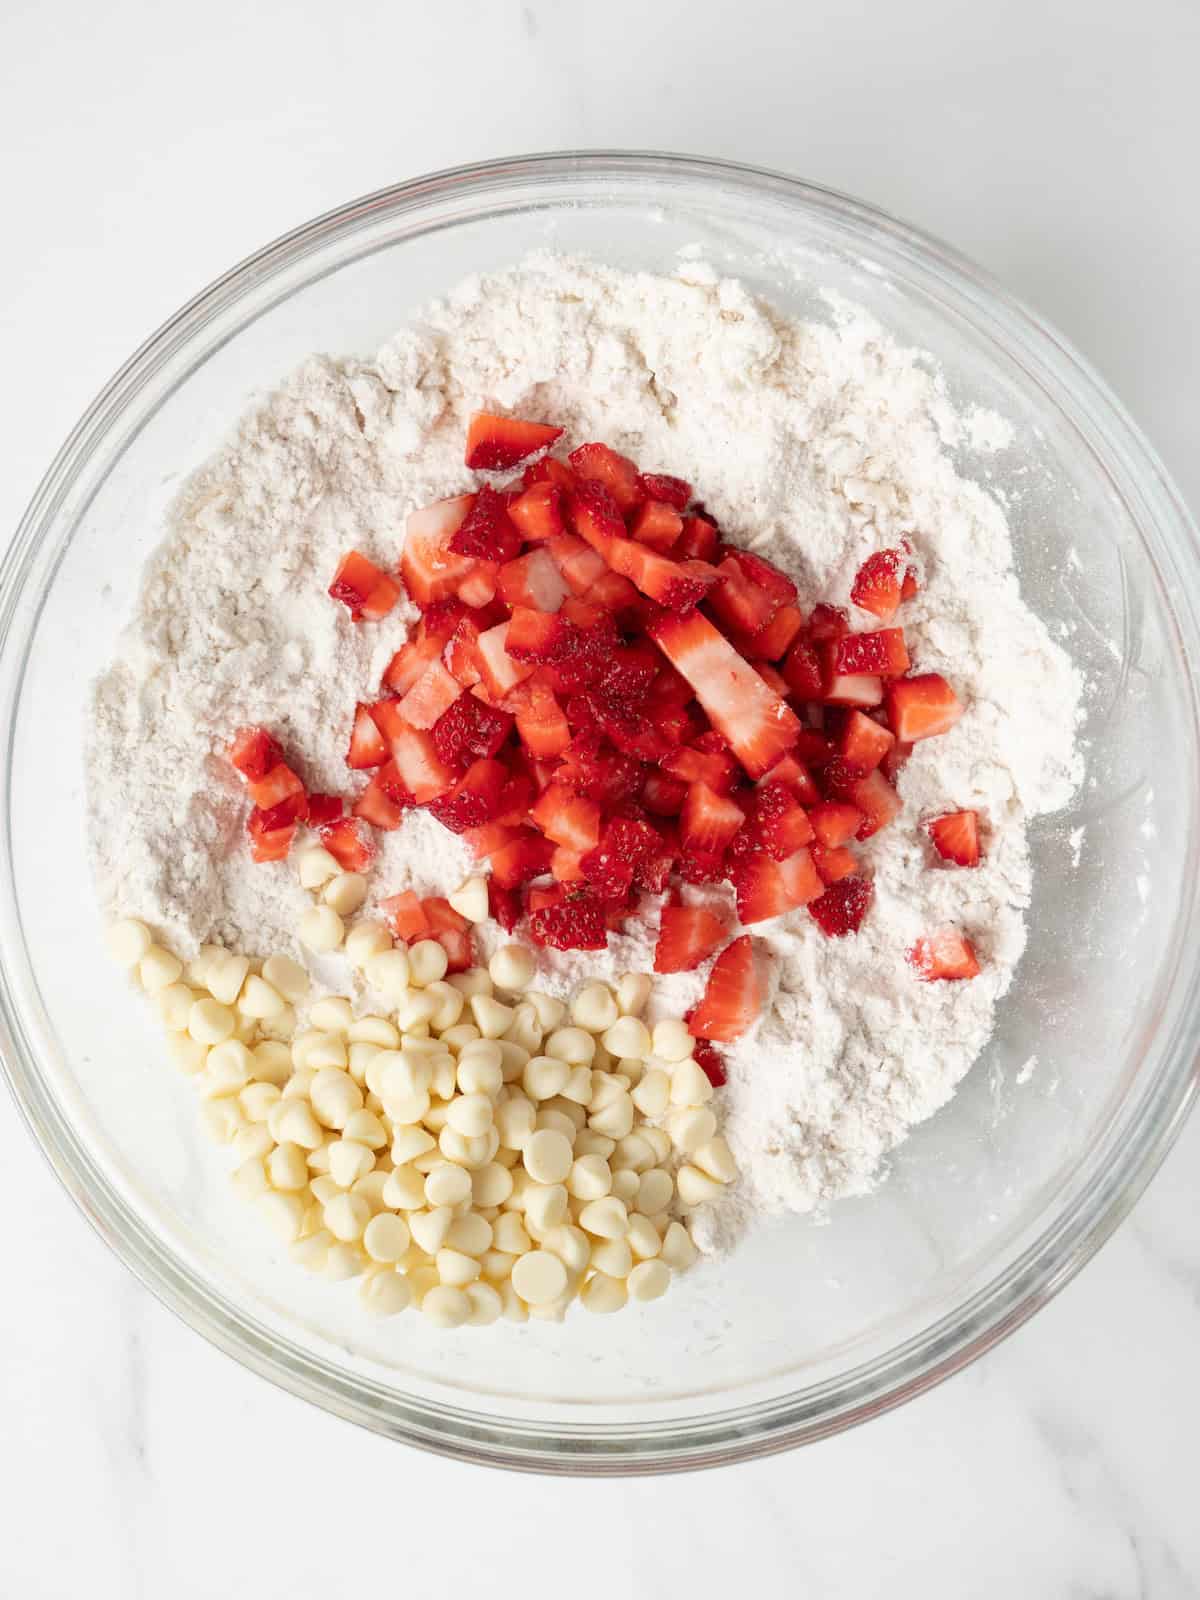 A large glass mixing bowl with white chocolate chips and chopped strawberries added to the flour and butter mixture.